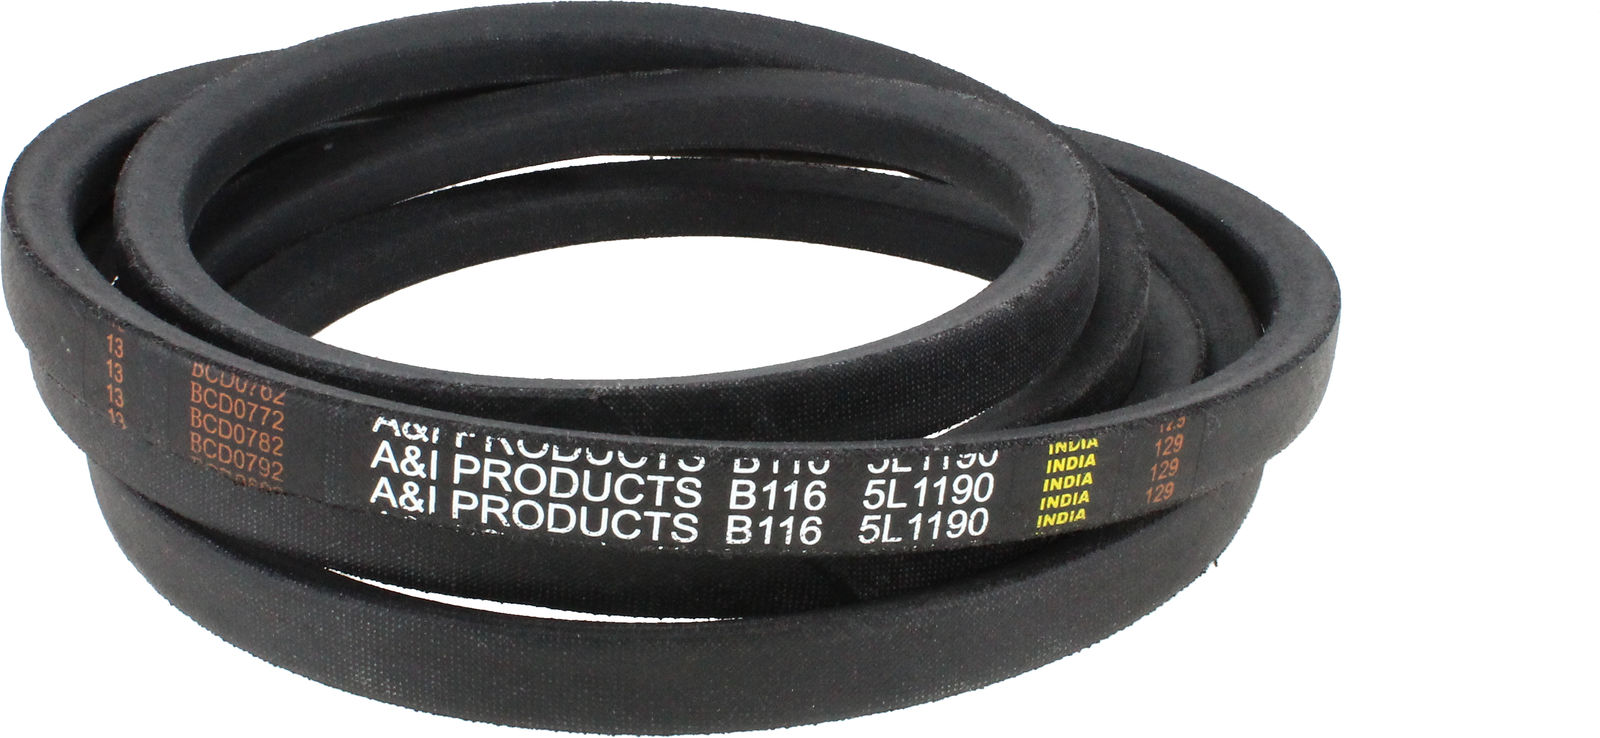 Classical Wrapped V-Belt B116 fits Amadas Several B-Section